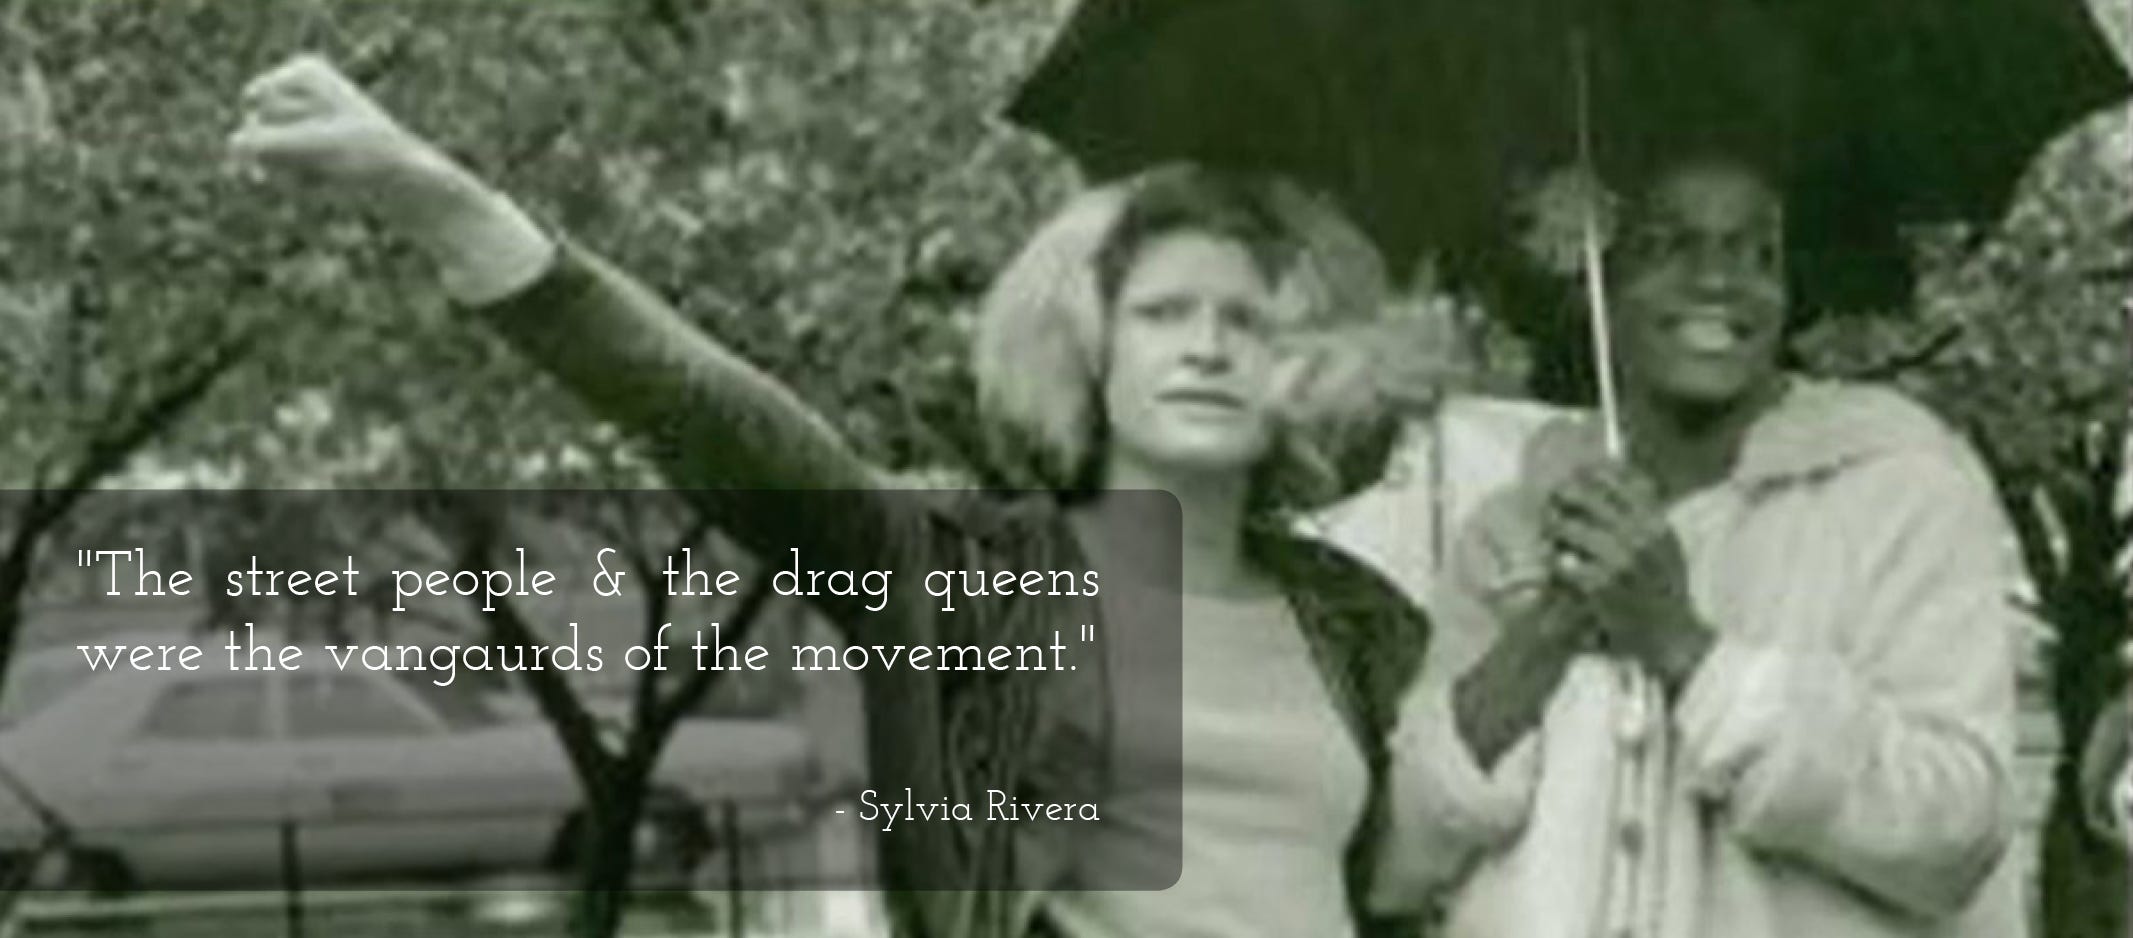 Black & white photograph showing Sylvia Rivera (fist raised in the air) on the left and Marsha P. Johnson (holding an umbrella) on the right. Quote from Sylvia Rivera to the left of the image reads: “The street people & the drag queens were the vanguards of the movement”